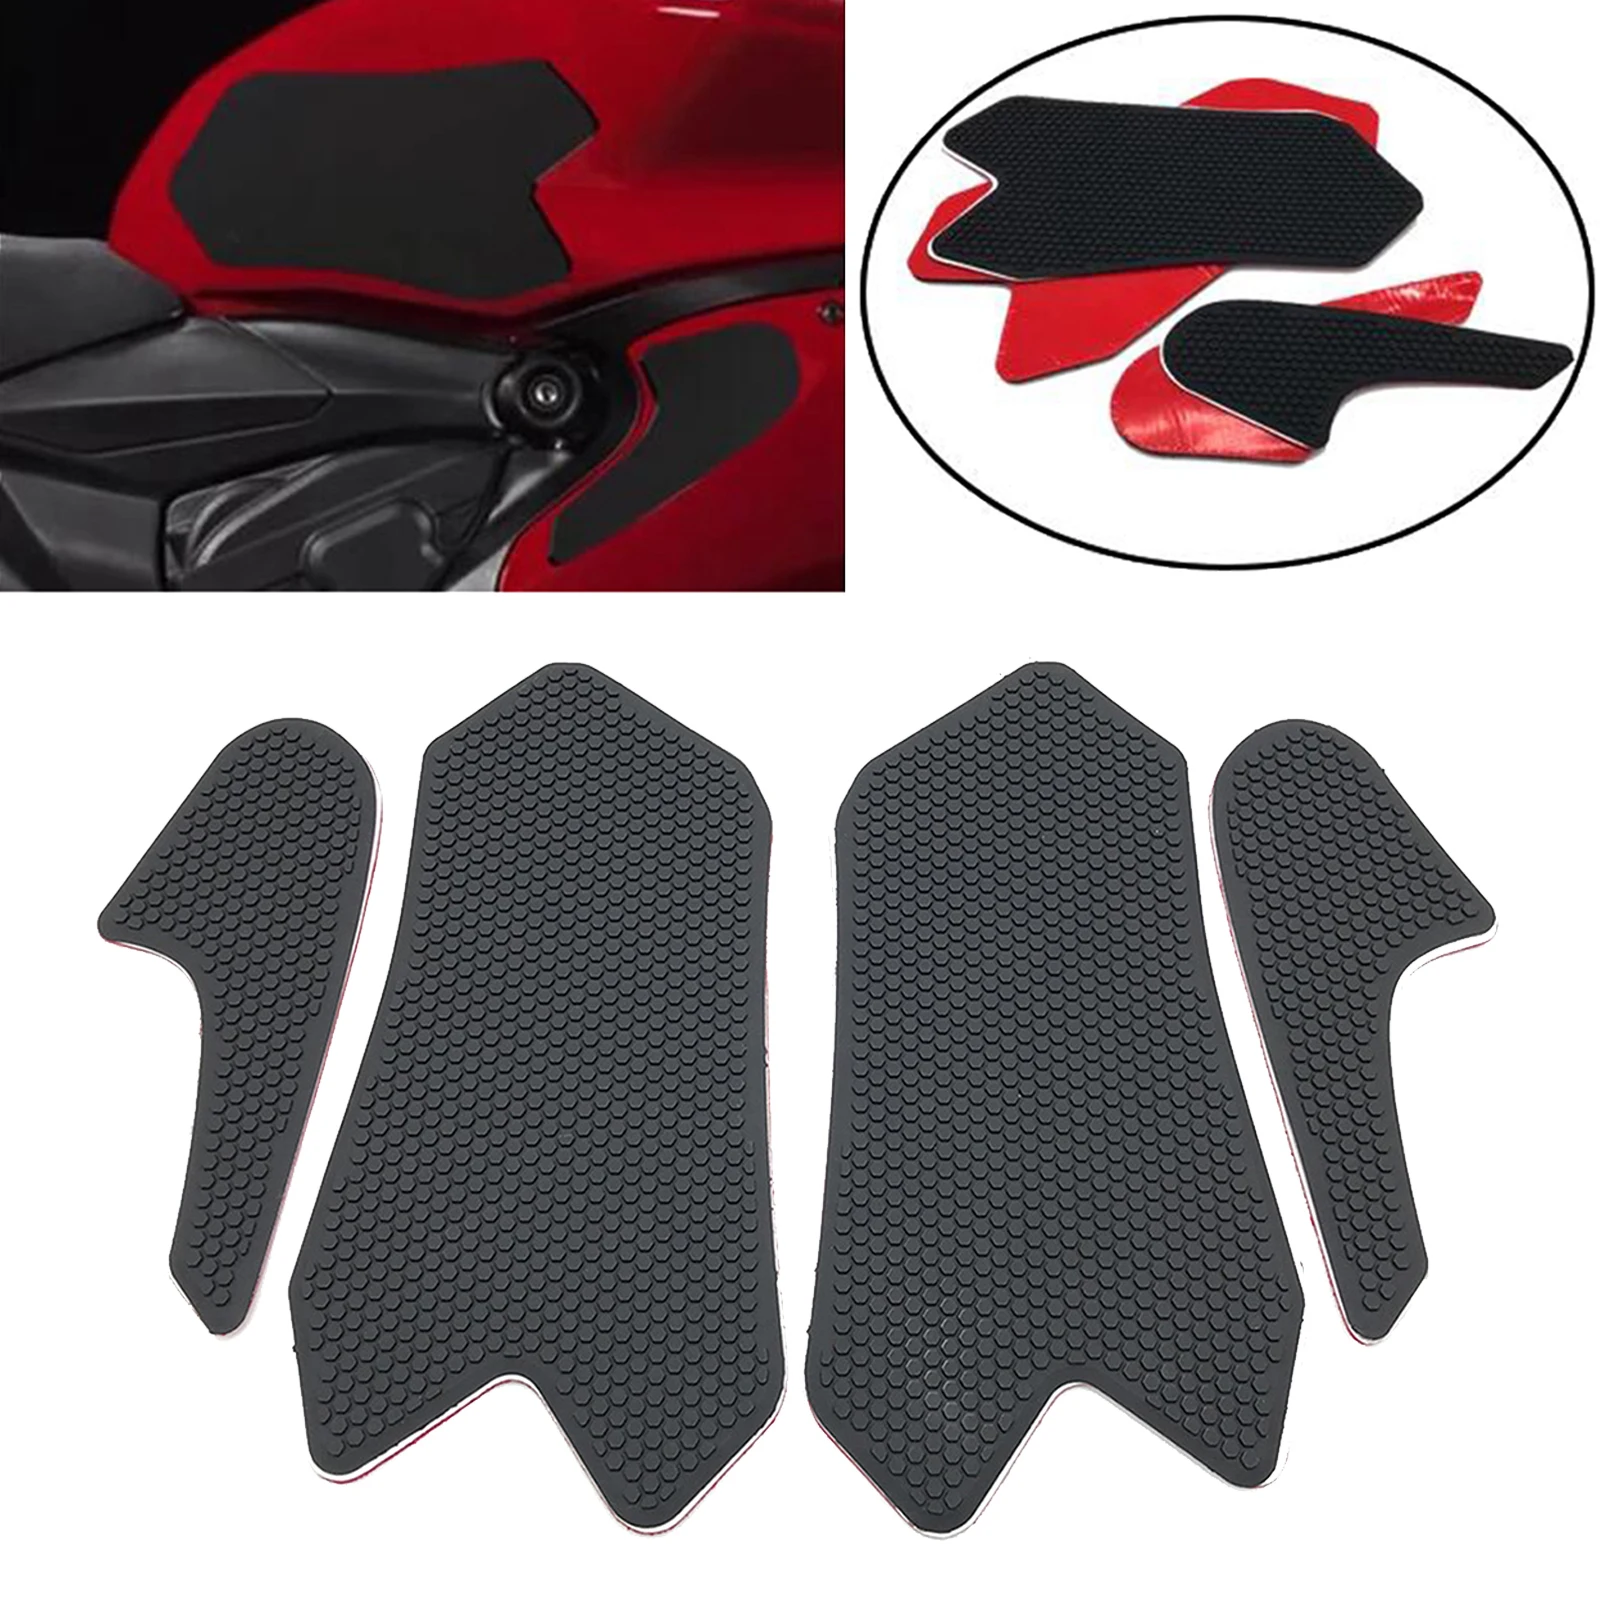 

Tank Traction Pads Side Gas Knee Grips Decals Protectors for Ducati Panigale 899 959 1199 1299, Easy to Install